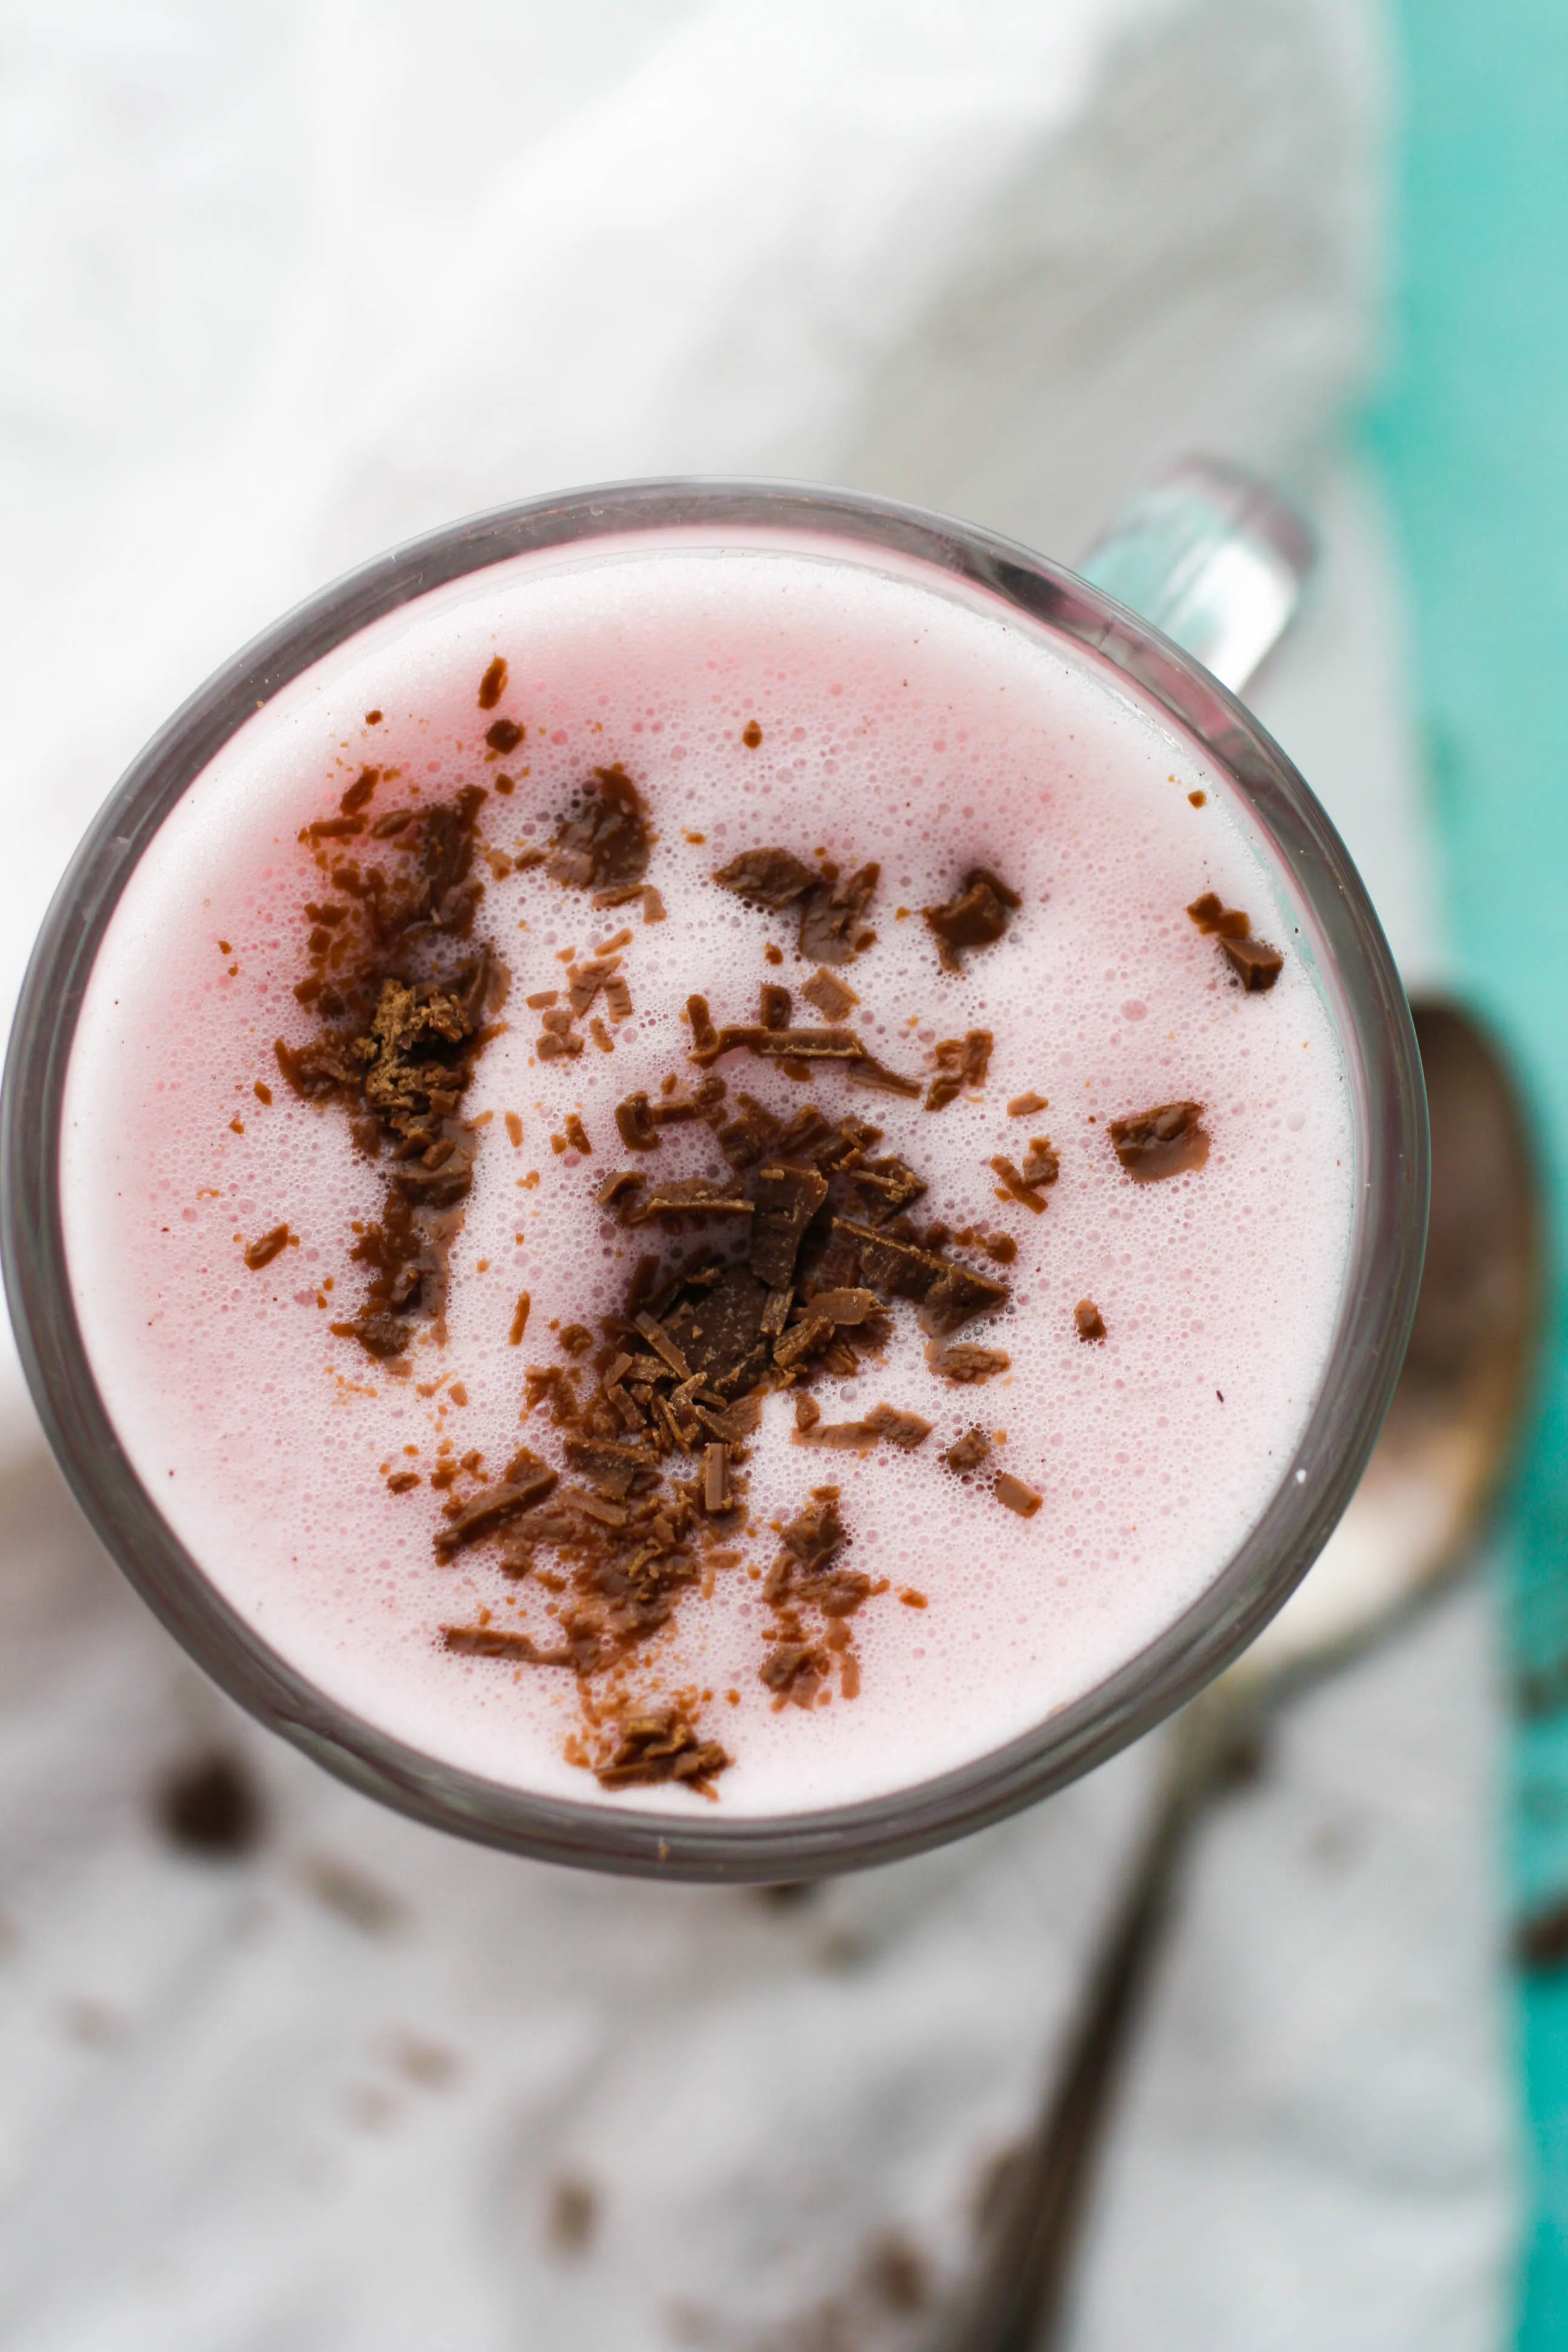 Spiced Beet and Oat Milk Latte is topped of with shaved chocolate. What a great beverage!